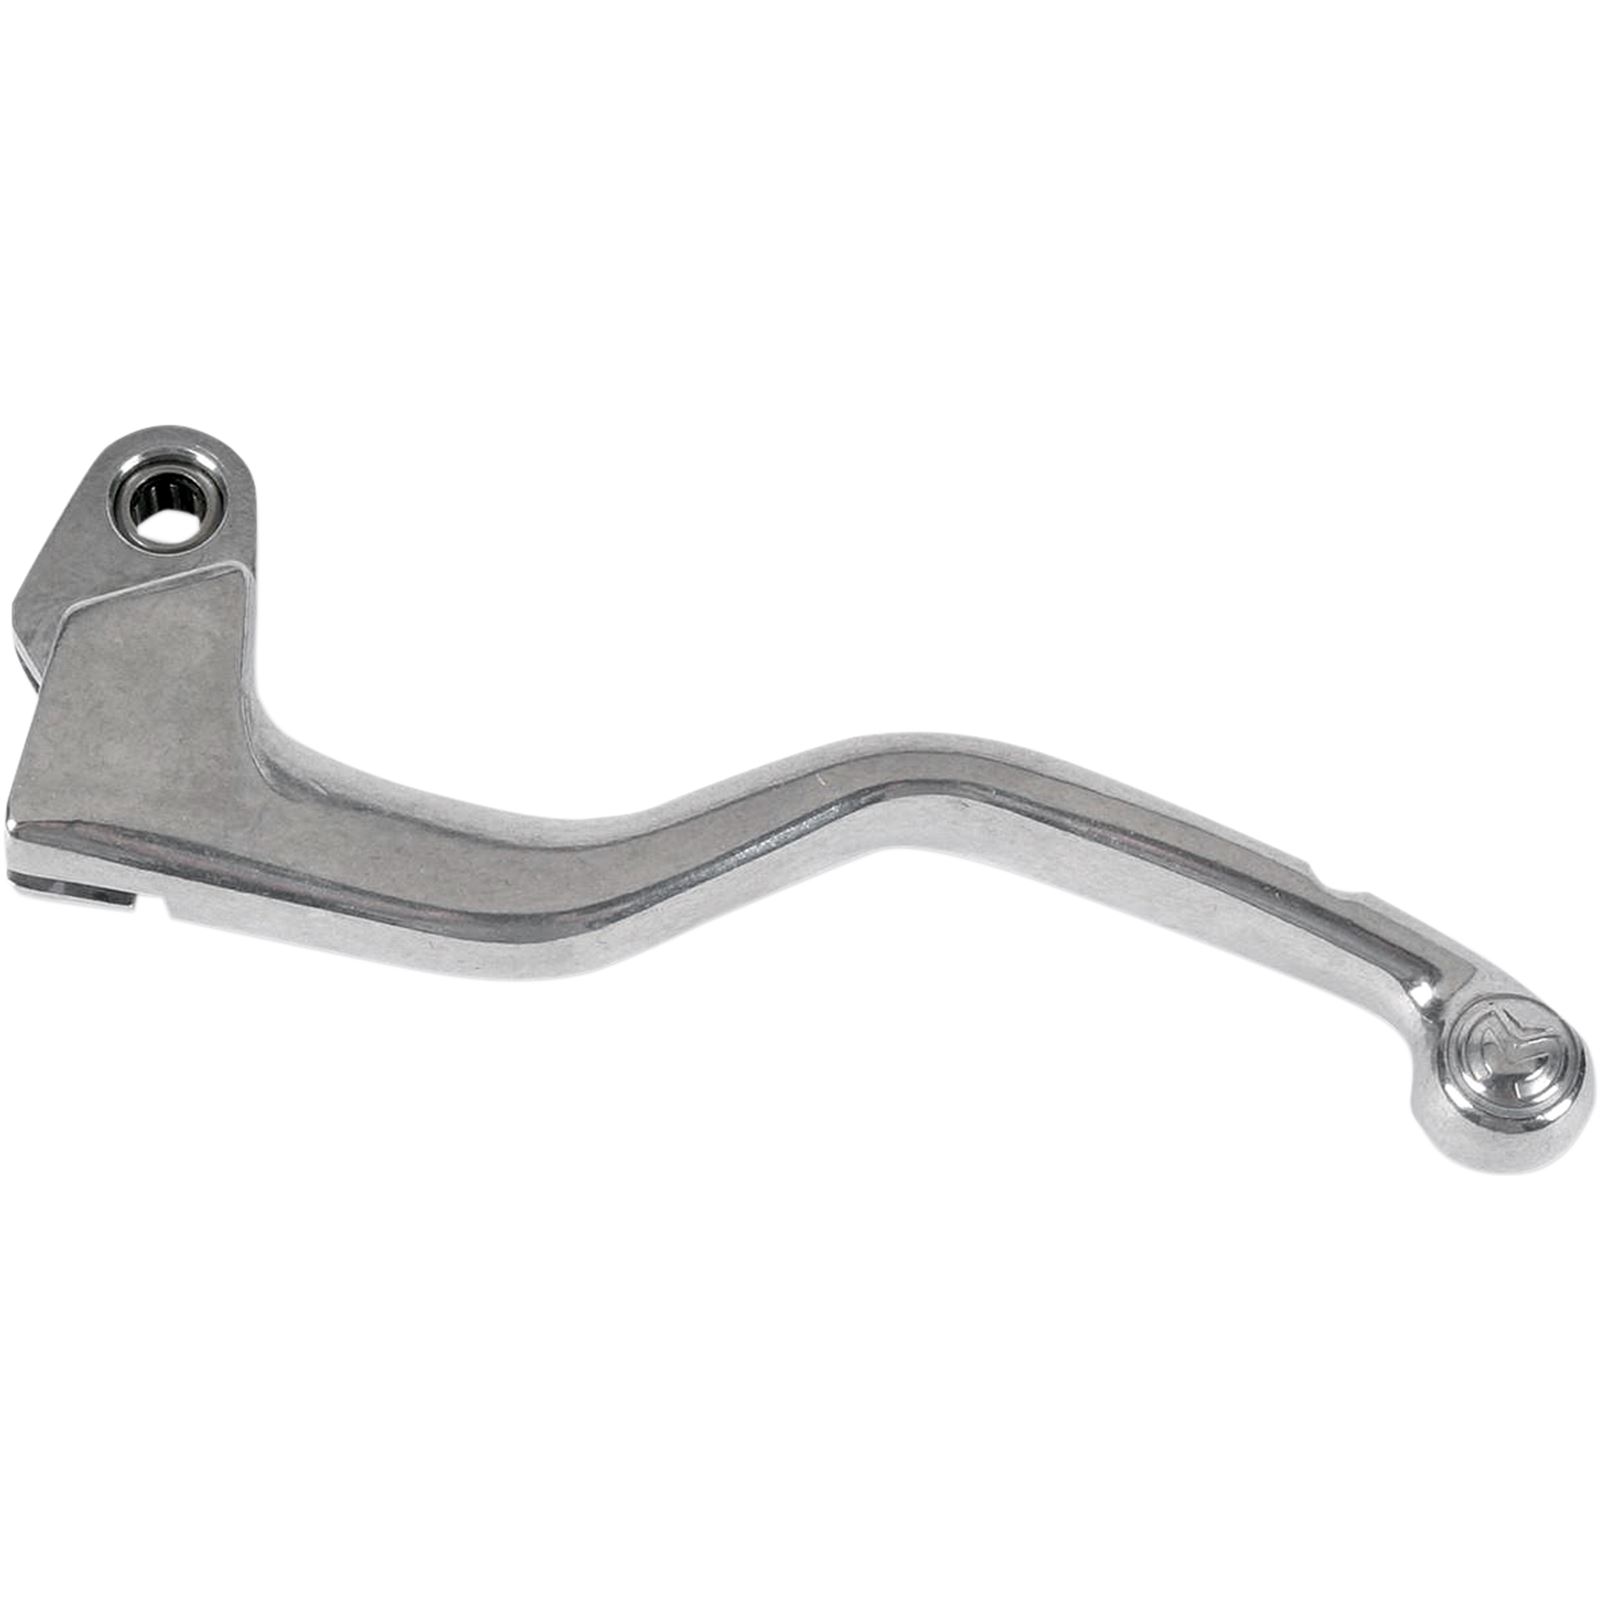 Moose Racing Ultimate Shorty Clutch Lever